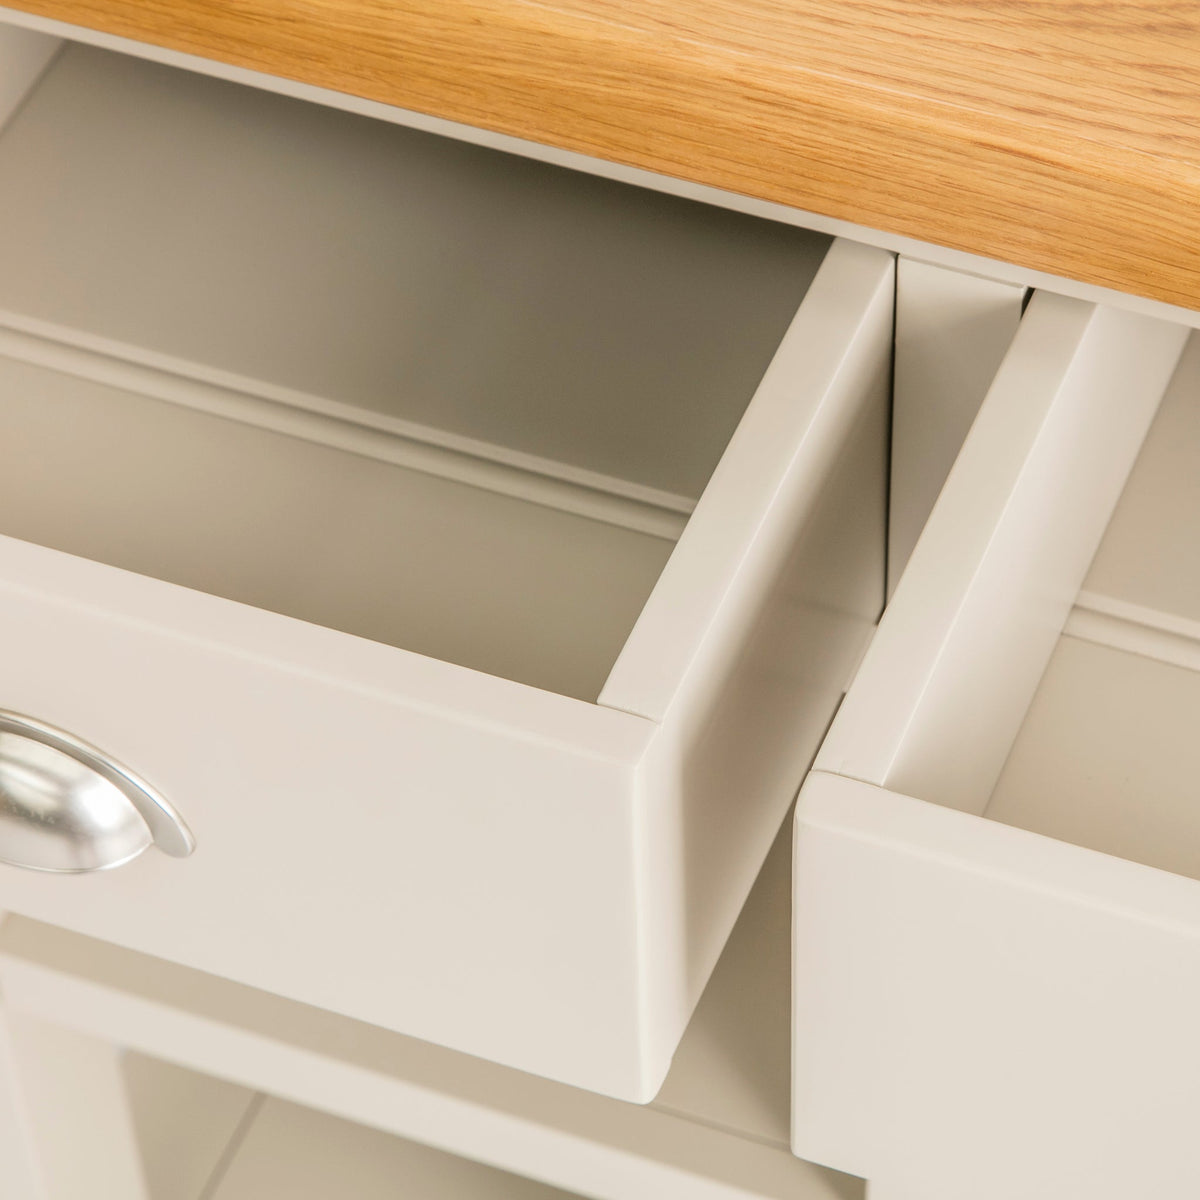 Padstow Stone Grey Large Kitchen Island - Close up of drawers